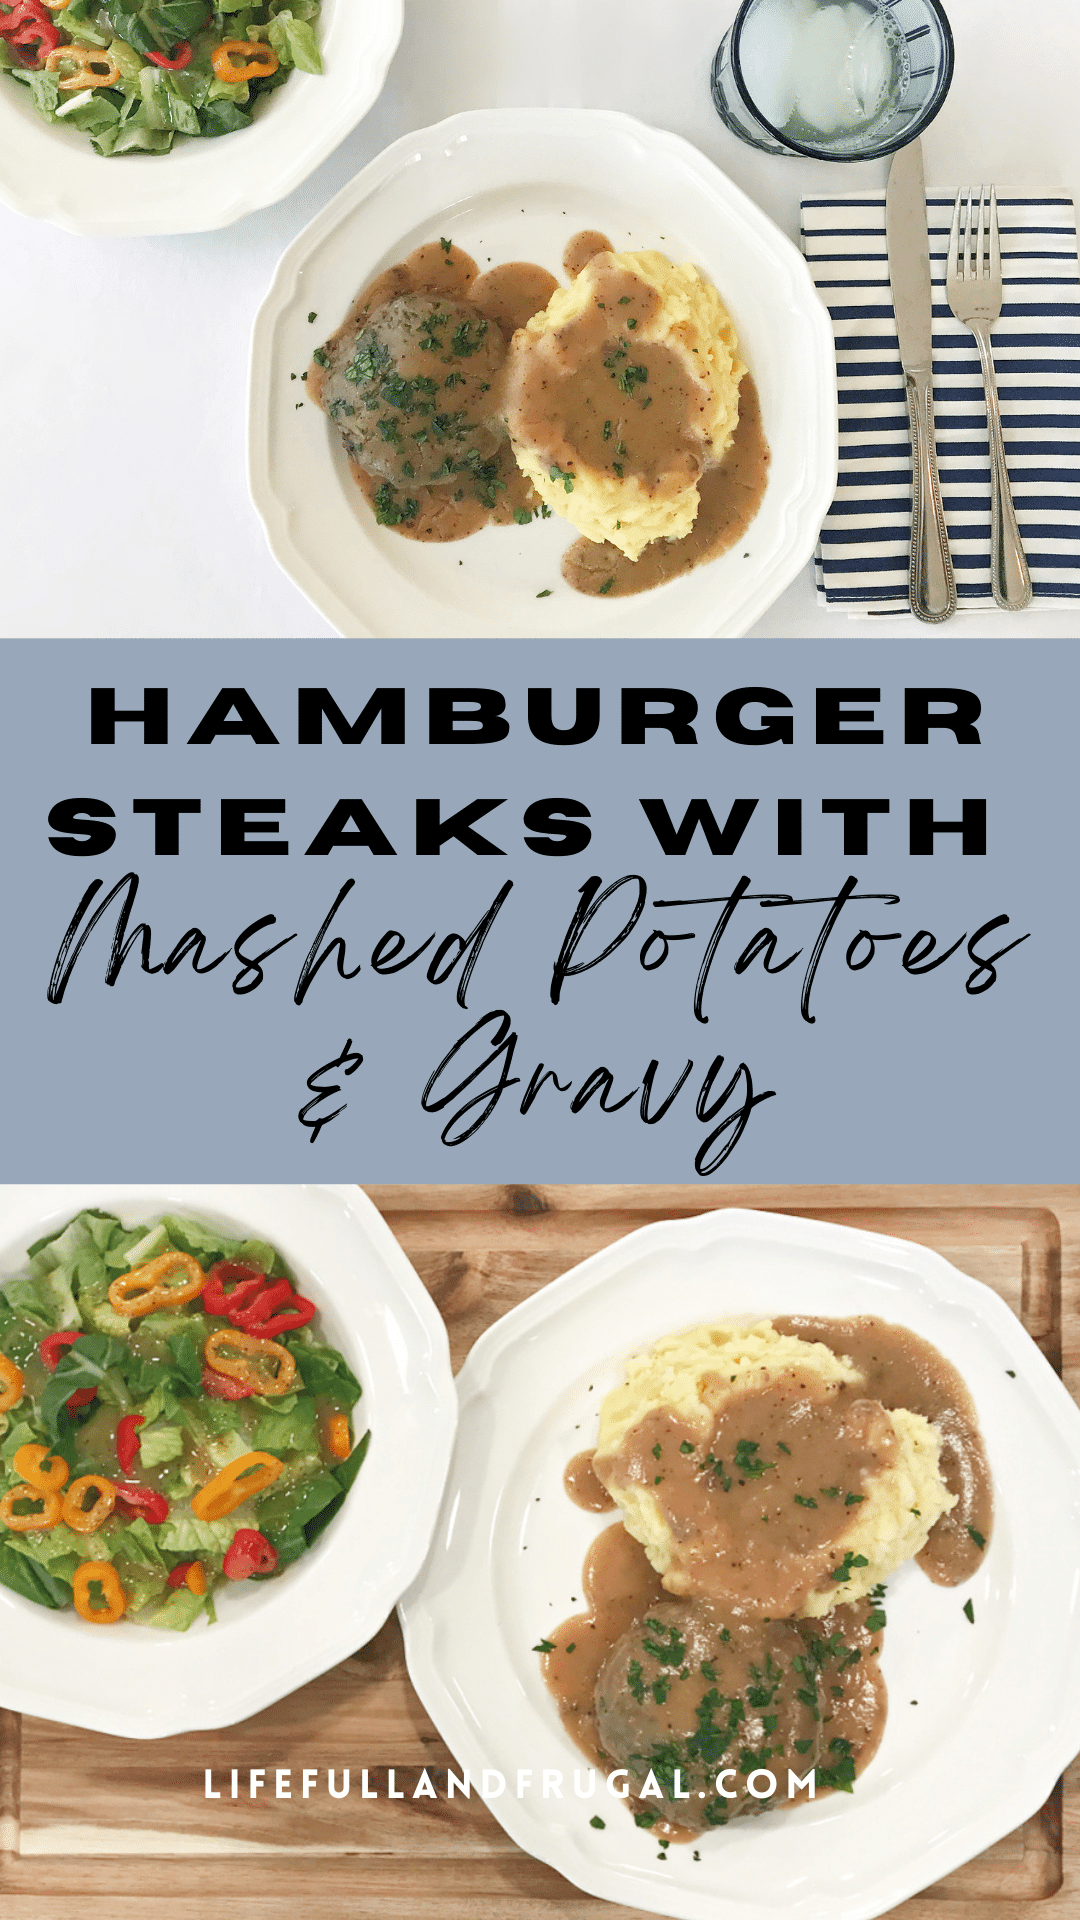 frugal winter comfort food inspiration: hamburger steaks with mashed potatoes and gravy - Life Full and Frugal